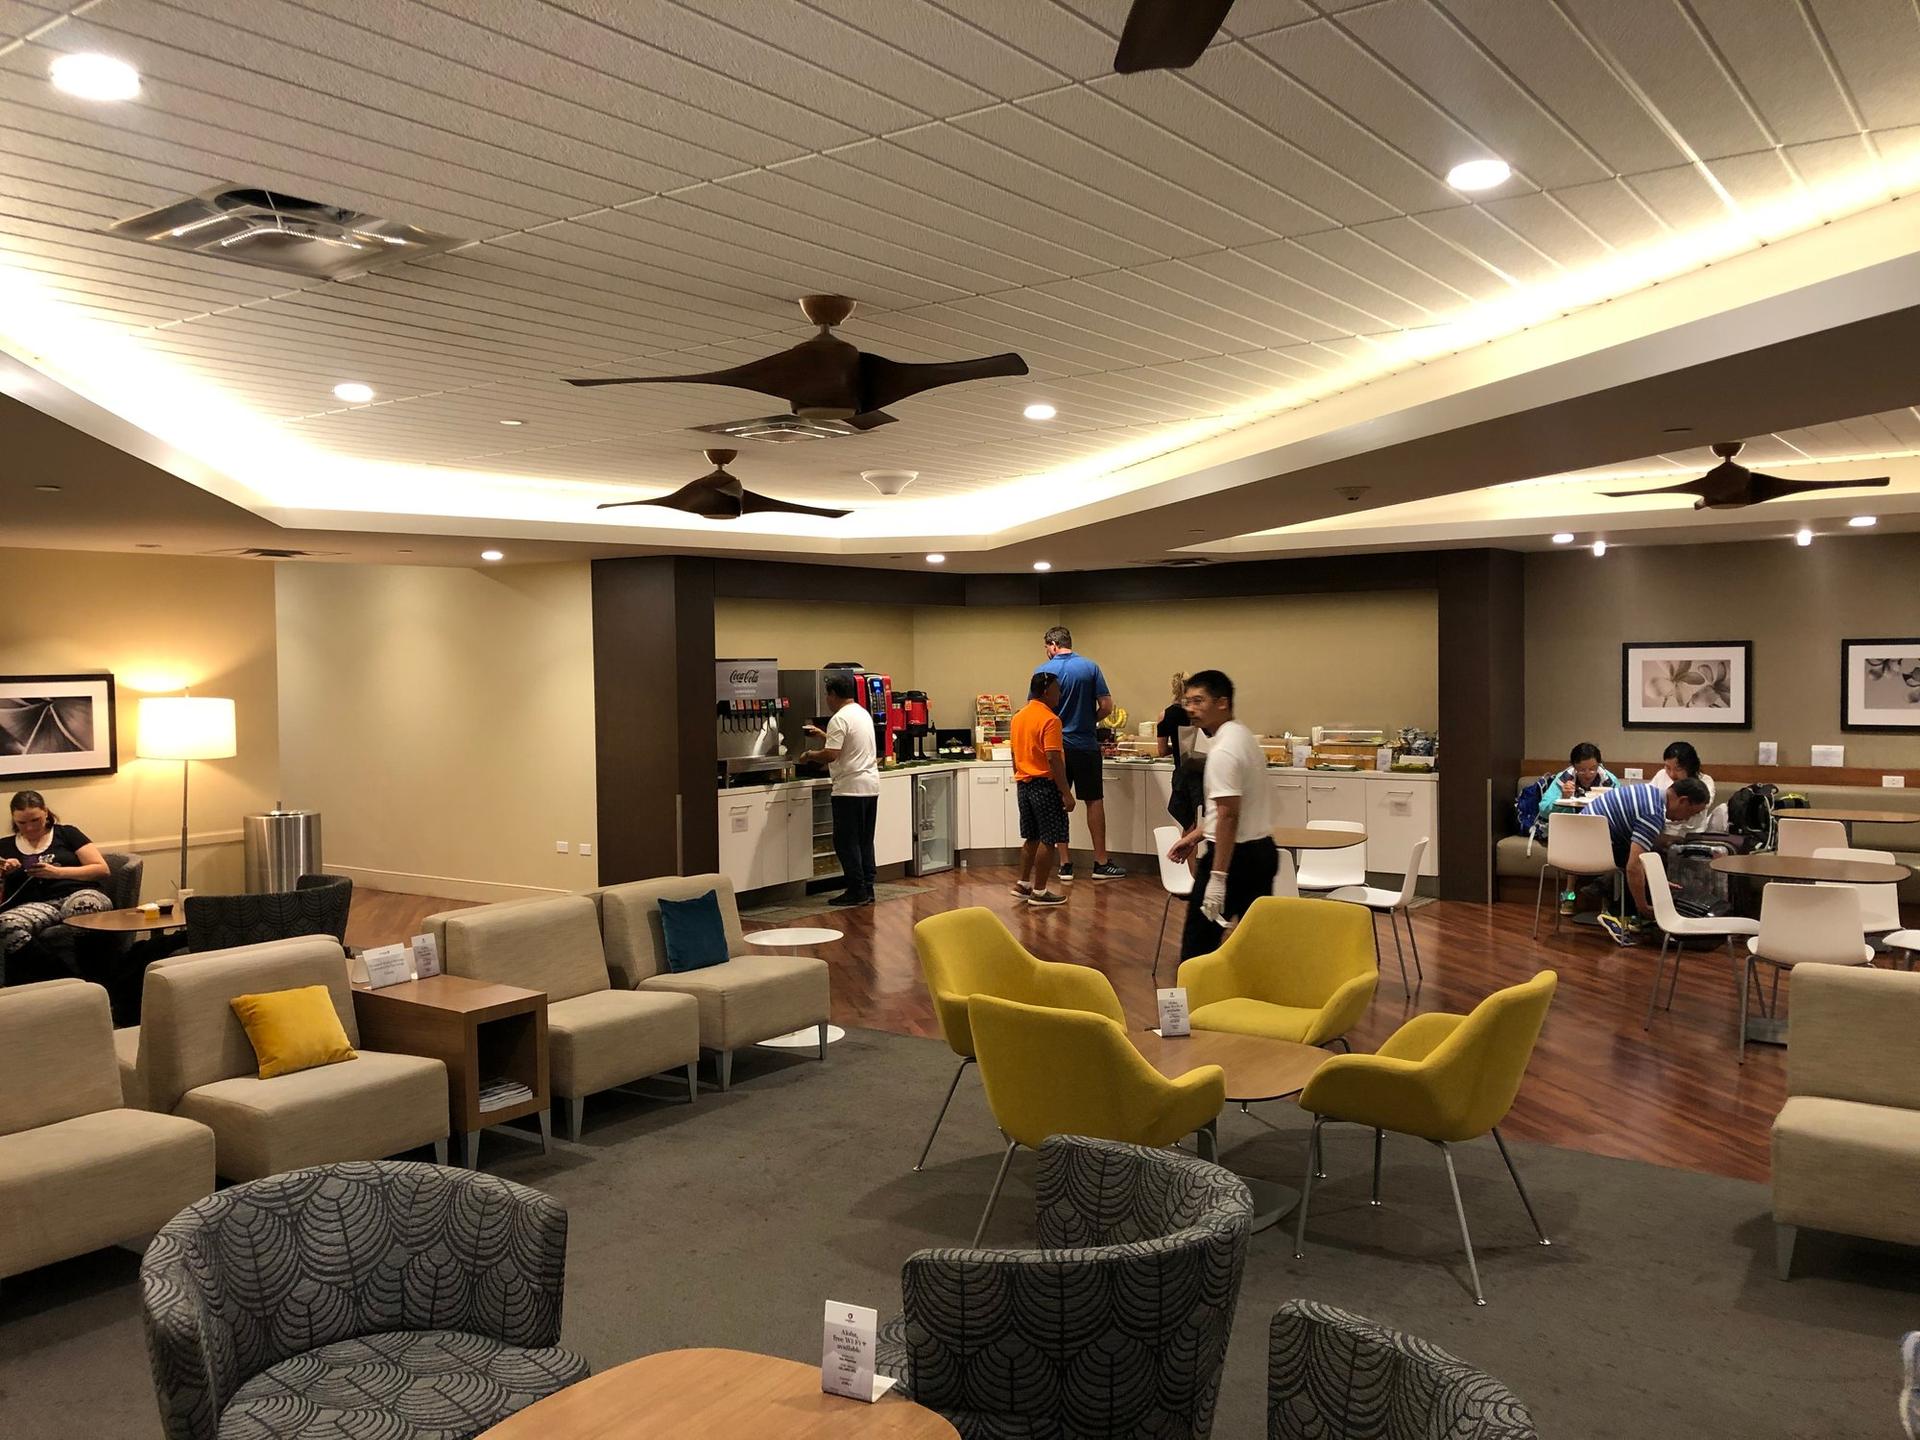 Hawaiian Airlines The Plumeria Lounge image 40 of 41